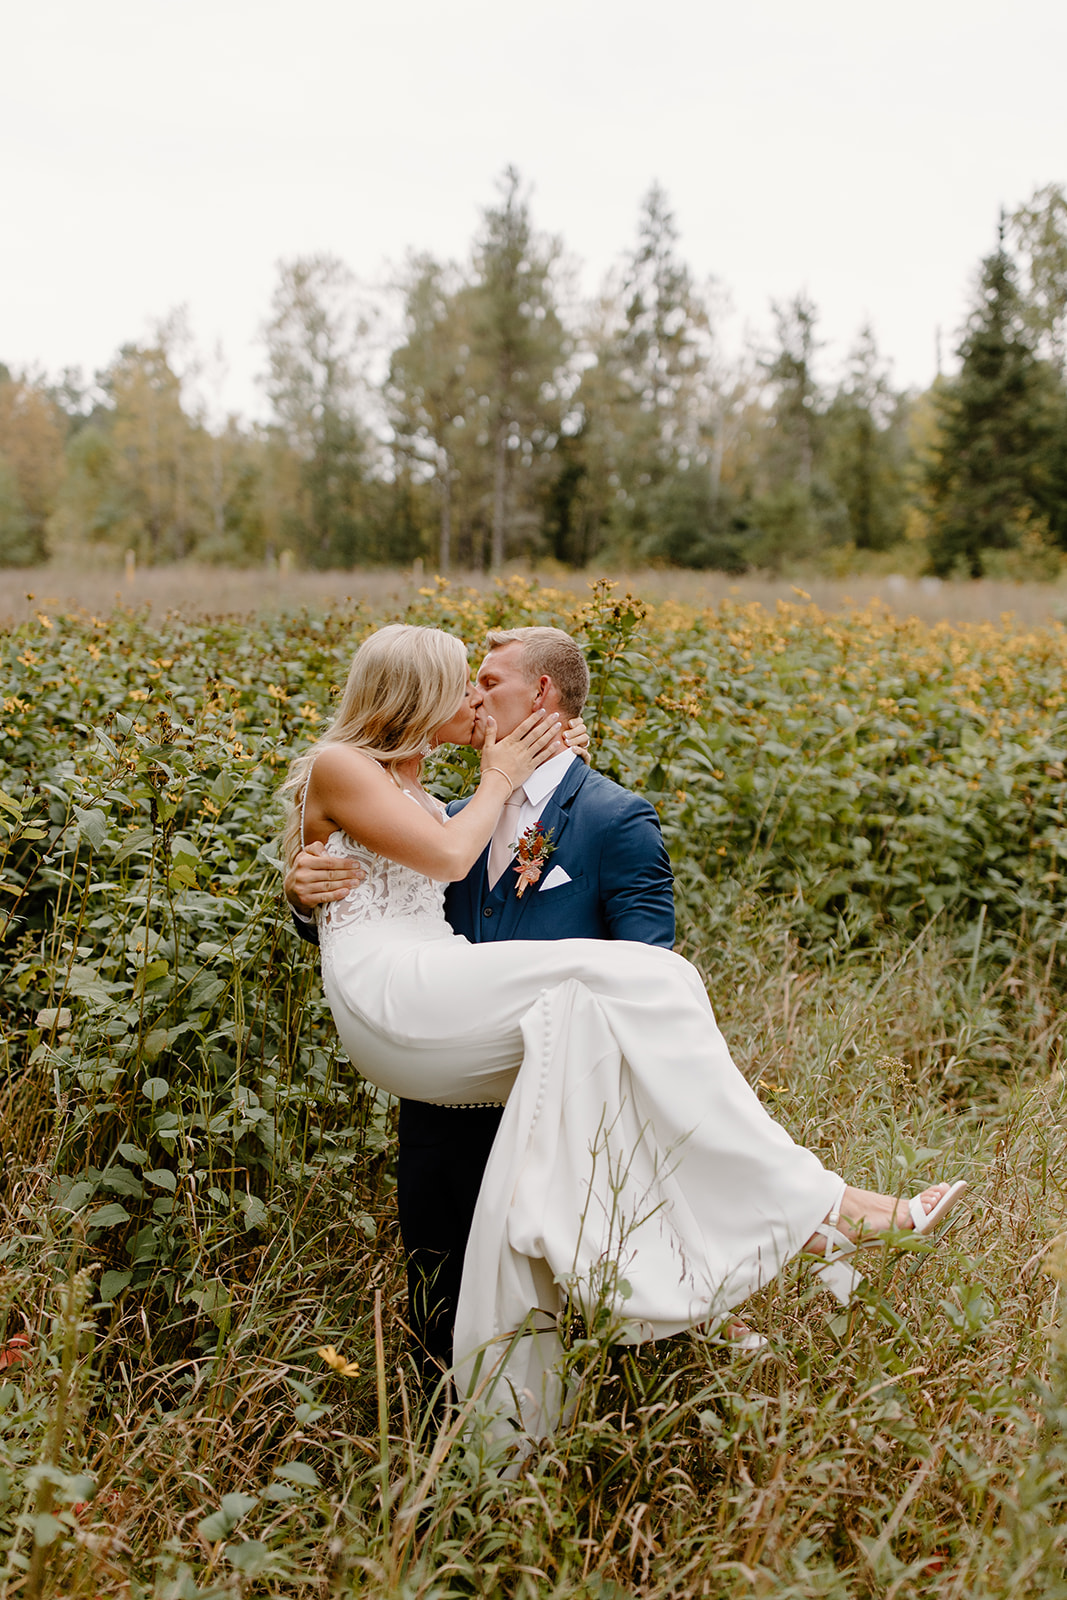 Groom holds his bride in a field of grass